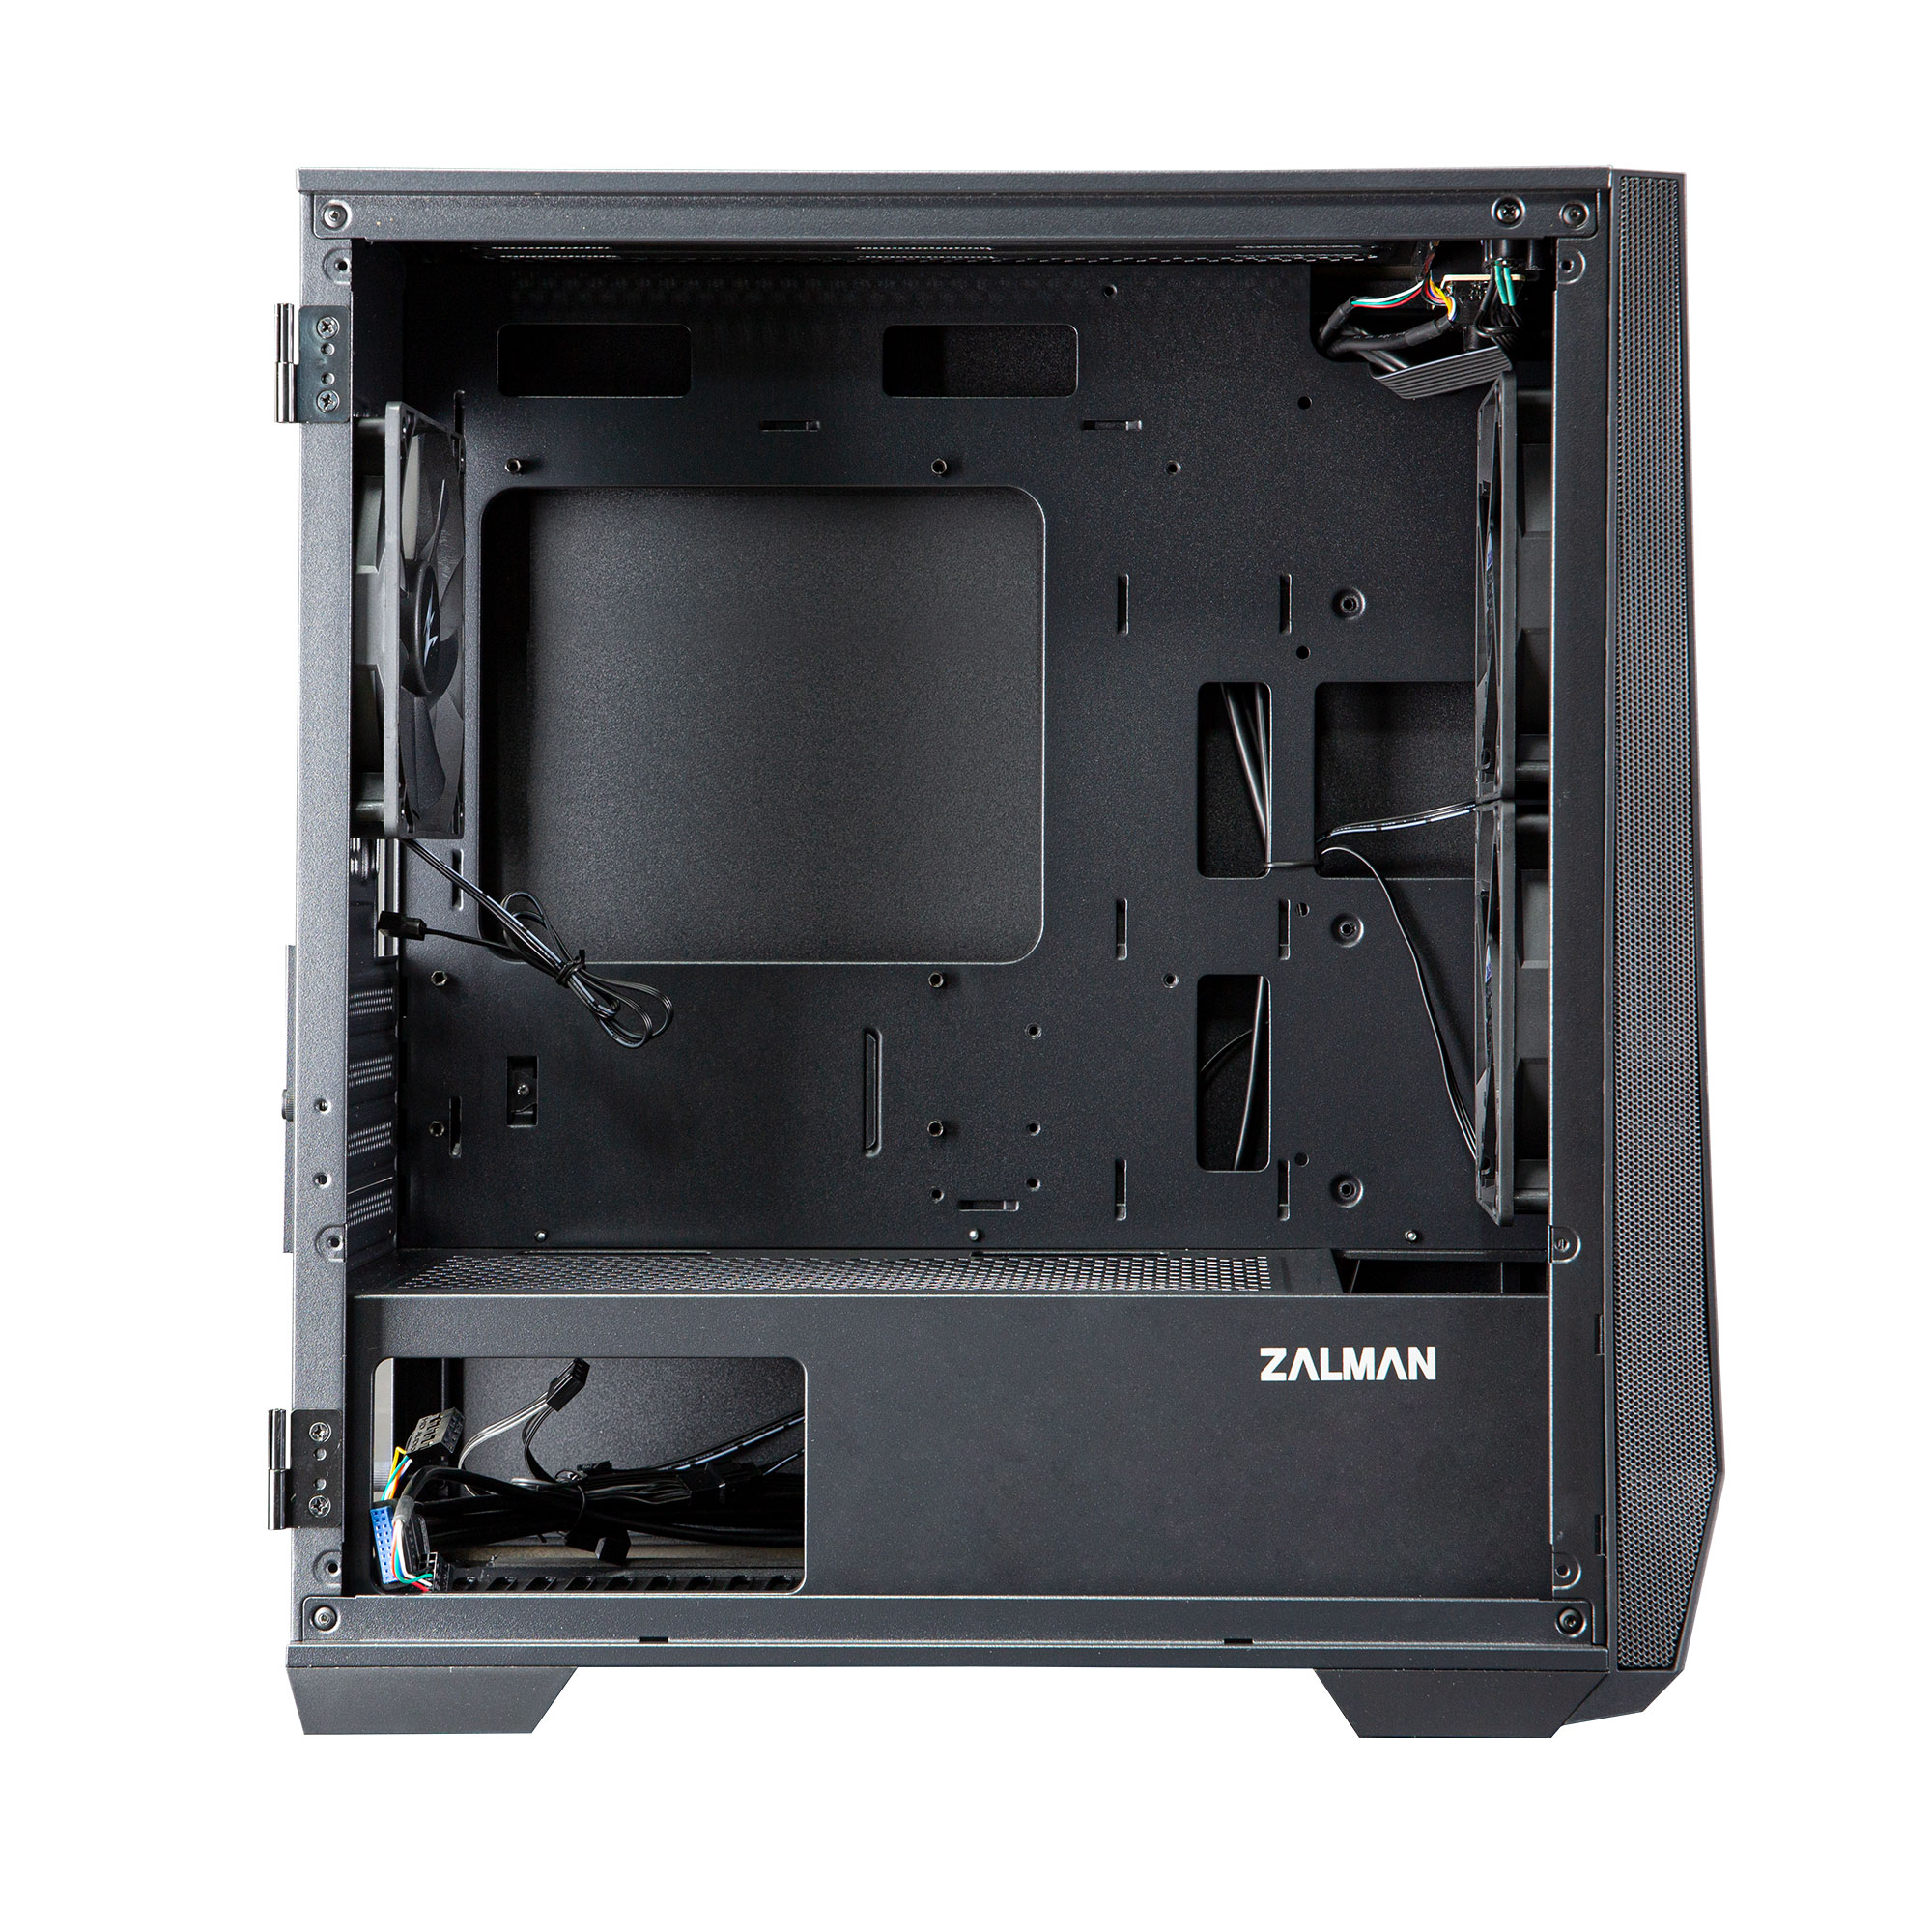 Zalman Z1 Iceberg - mATX Mid Tower PC Case/ Pre-installed fan : 2 x 120mm fan in front & 1 x 120mm fan in rear/ Support up to 240mm radiator at front/Top/ Drive bays : 2 x 2.5/3.5 & 3 x 2.5/ Tempered glass on left side/ Dimension : 360(D) x 210(W) x